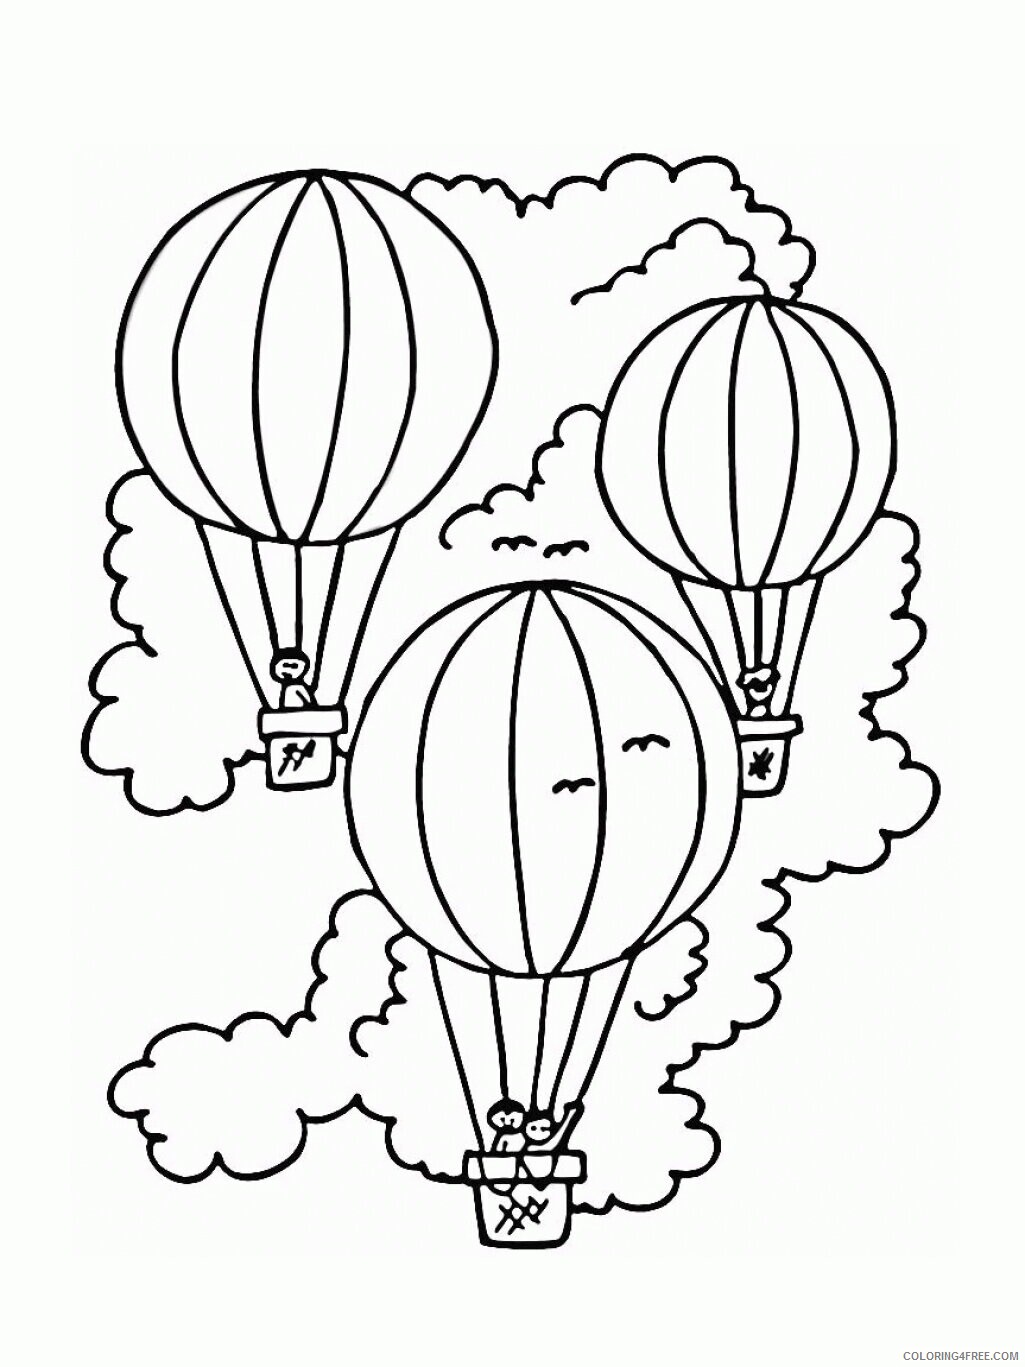 Air Transportation Vehicle Coloring Page Transportation Best Coloring 2021 a 2940 Coloring4free